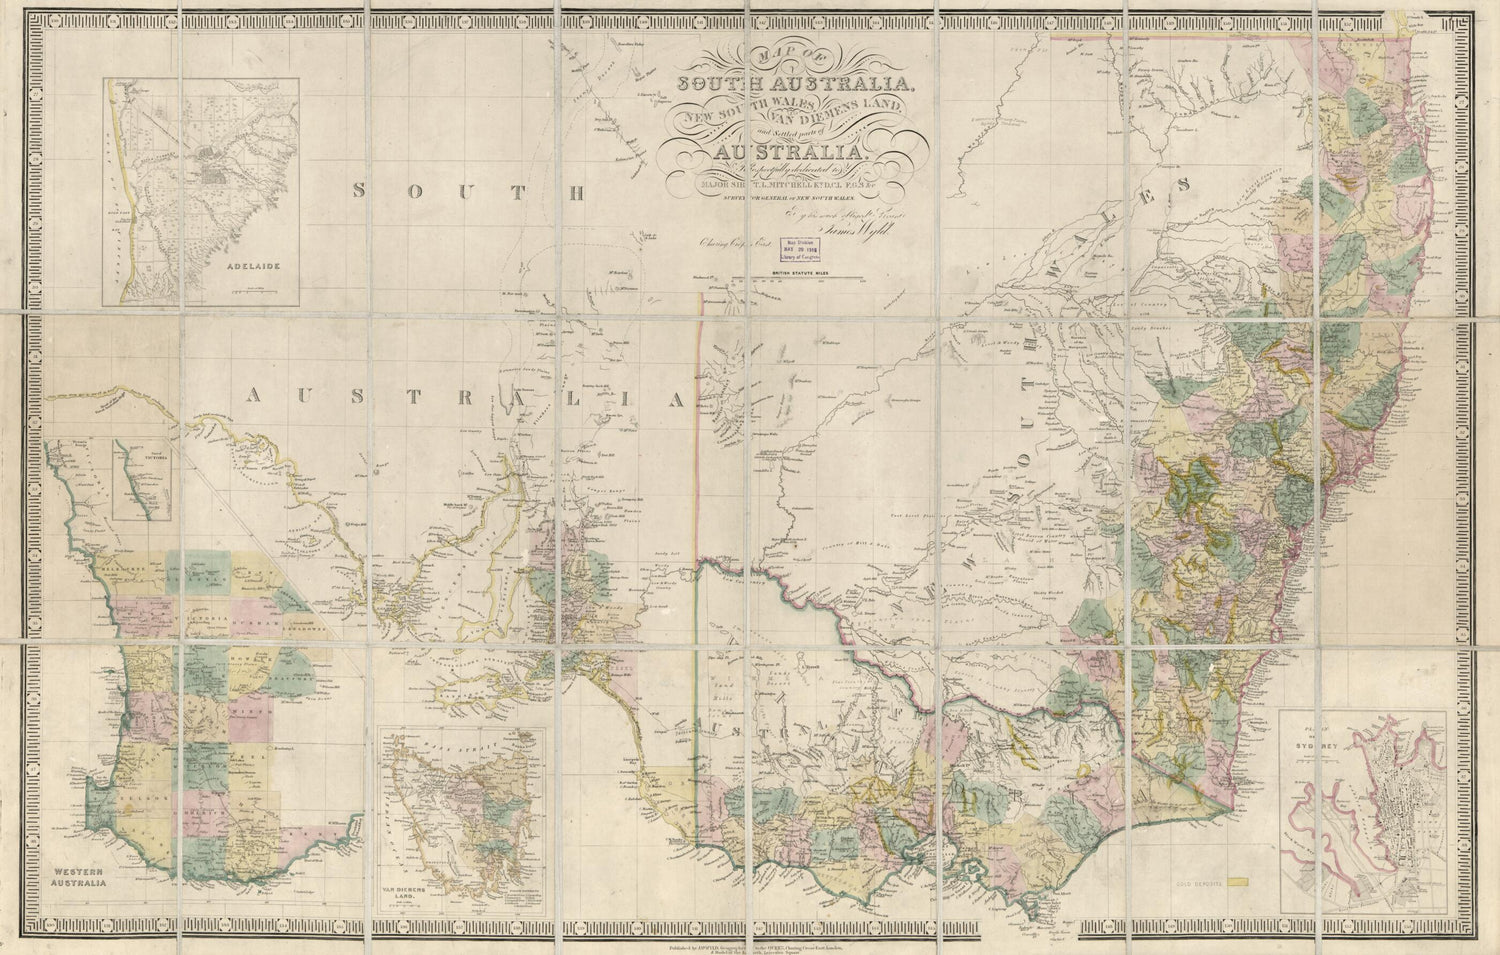 This old map of Map of South Australia, New South Wales, Van Diemens Land, and Settled Parts of Australia from 1850 was created by James Wyld in 1850